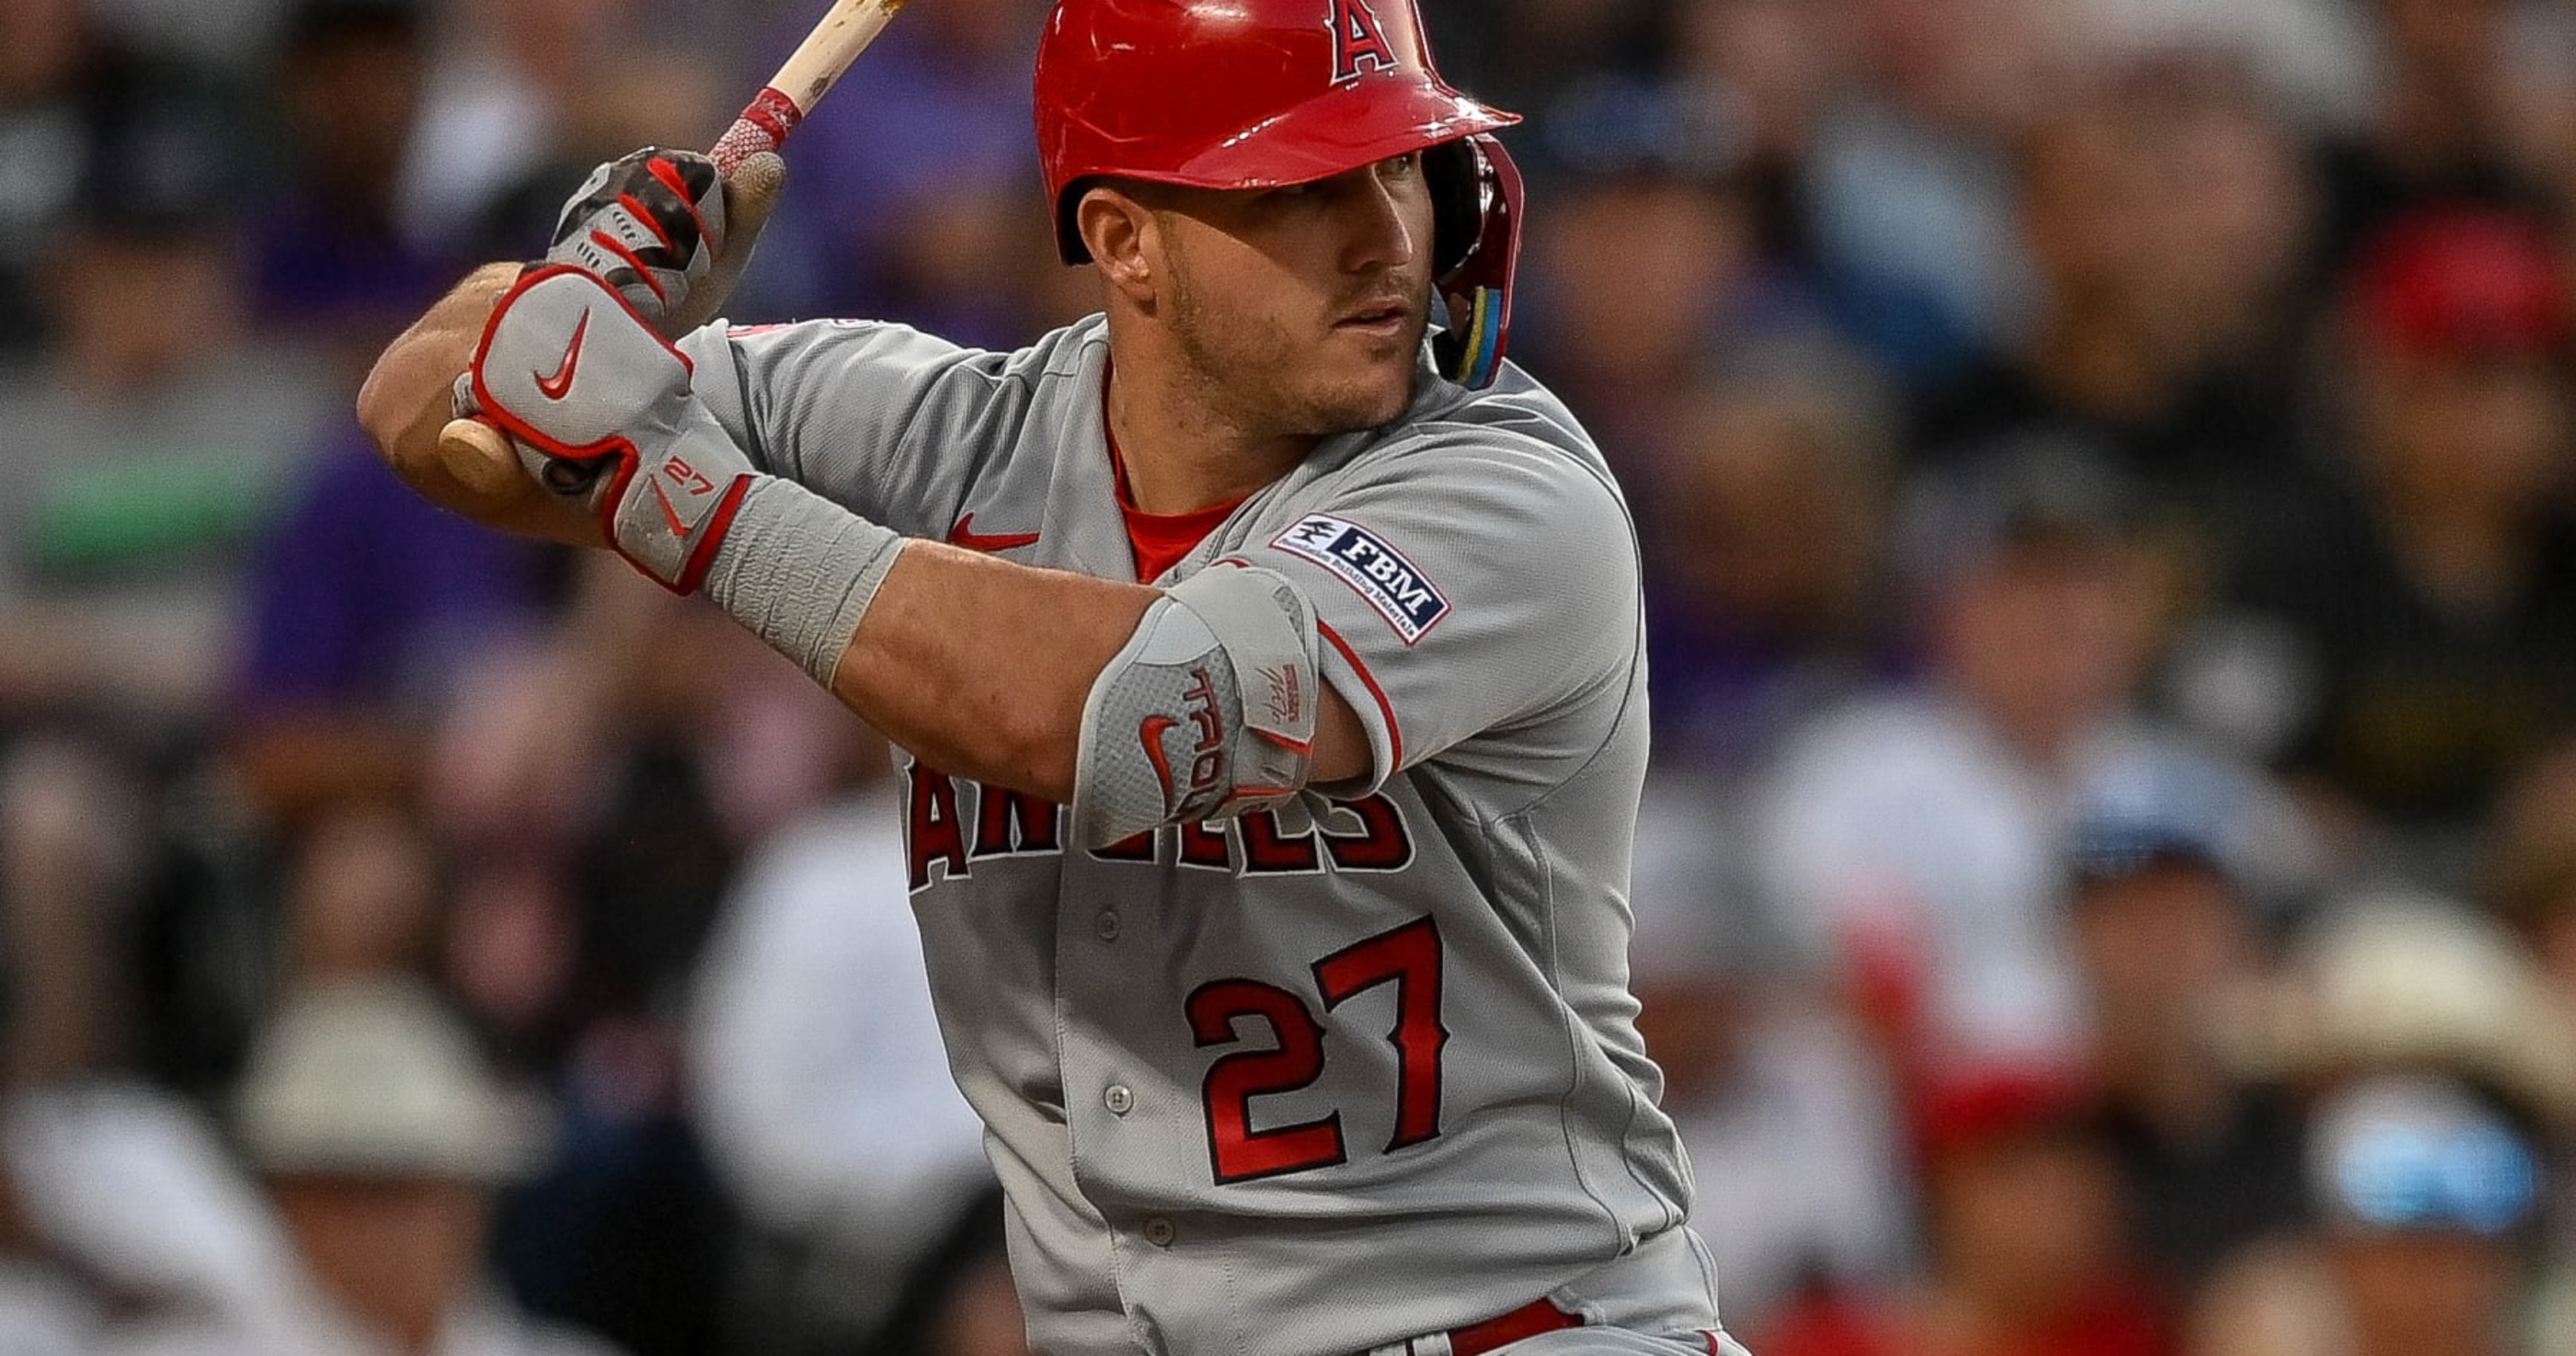 On this date five years ago, Mike Trout changed the face of the